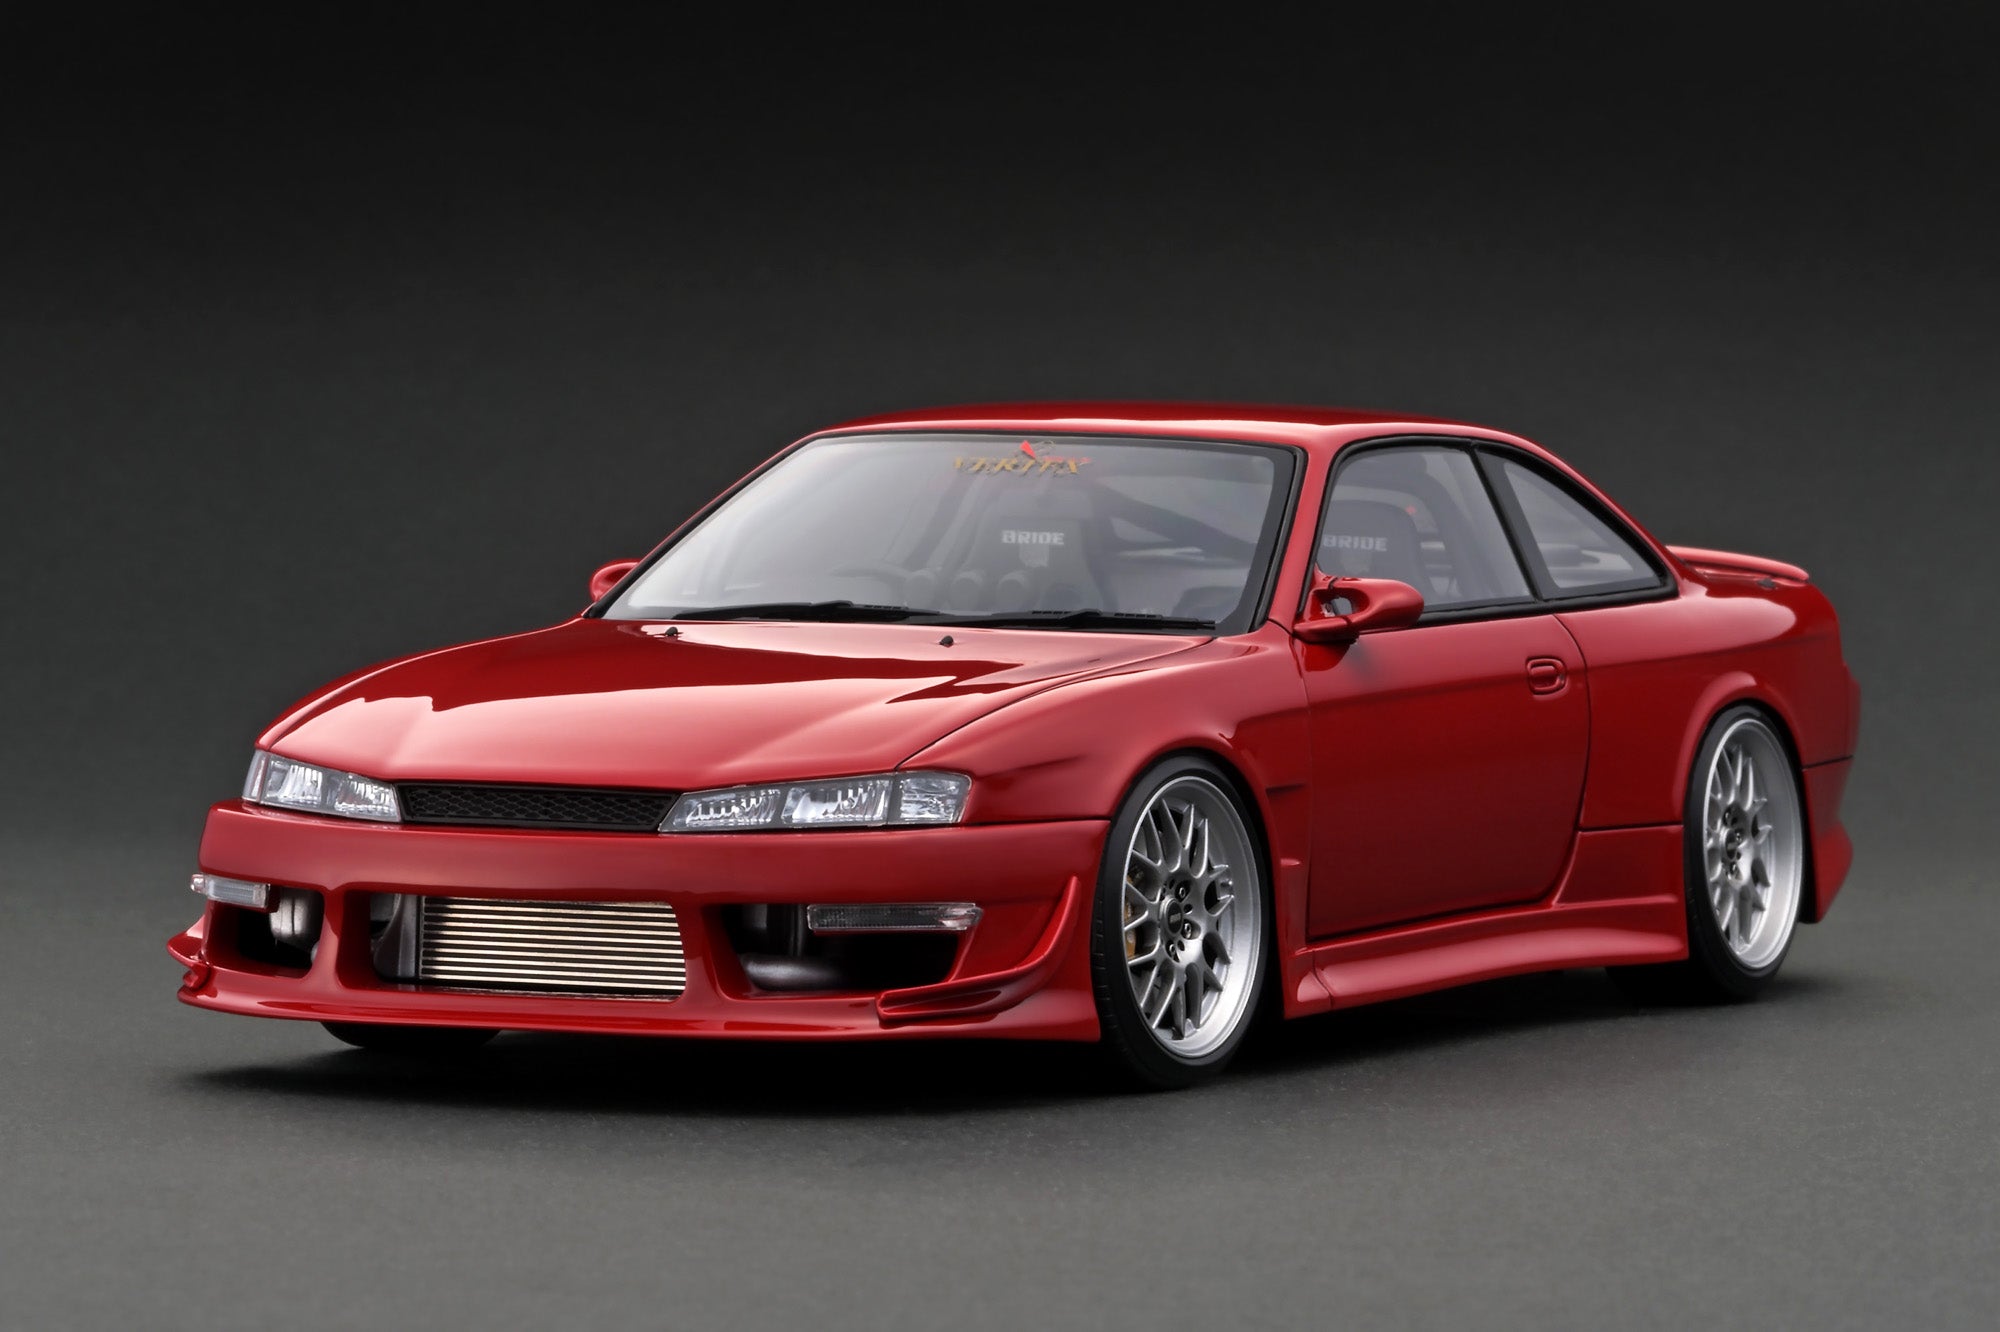 IG3083 VERTEX S14 Silvia Red With SR20 Engine – ignition model